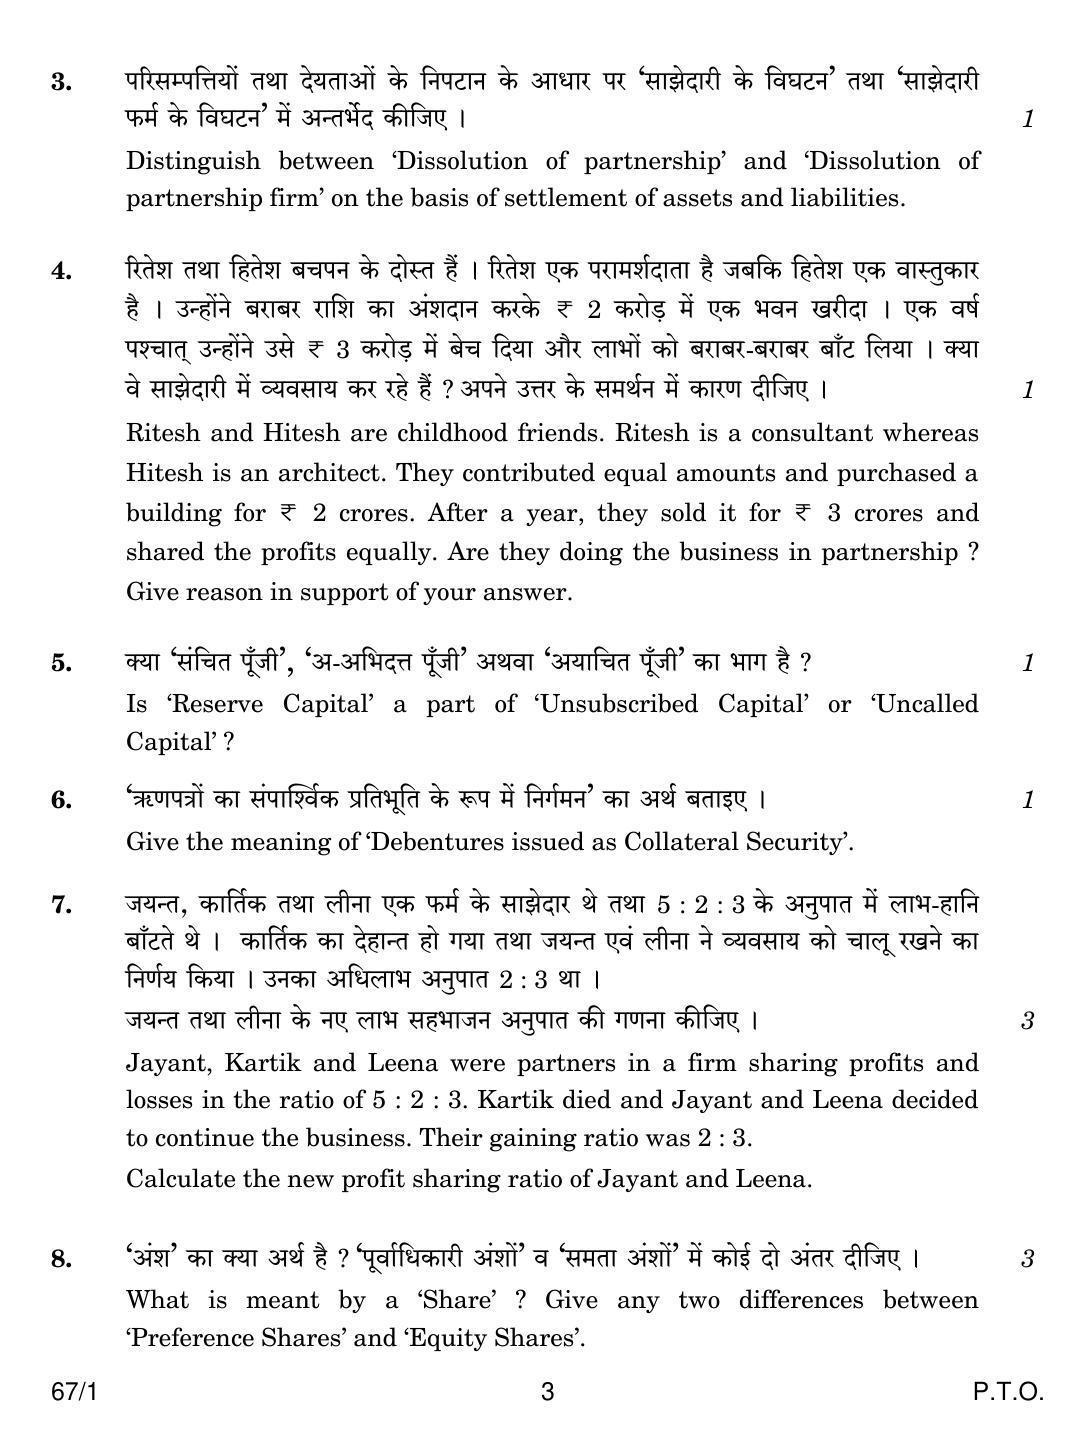 CBSE Class 12 67-1 ACCOUNTANCY 2018 Question Paper - Page 3